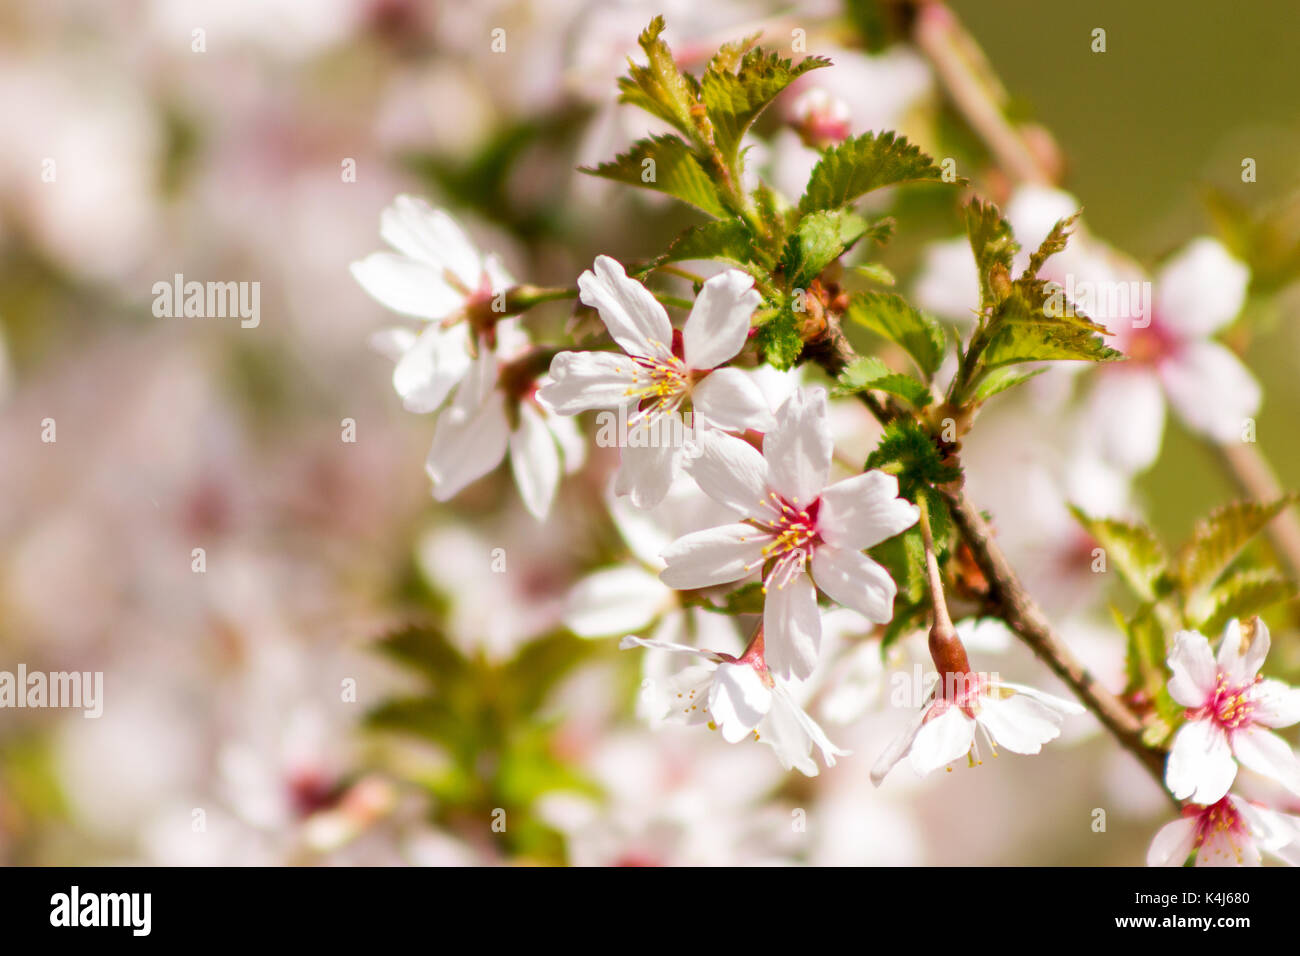 One blooming branch of sakura at blurred green and pink background Stock Photo